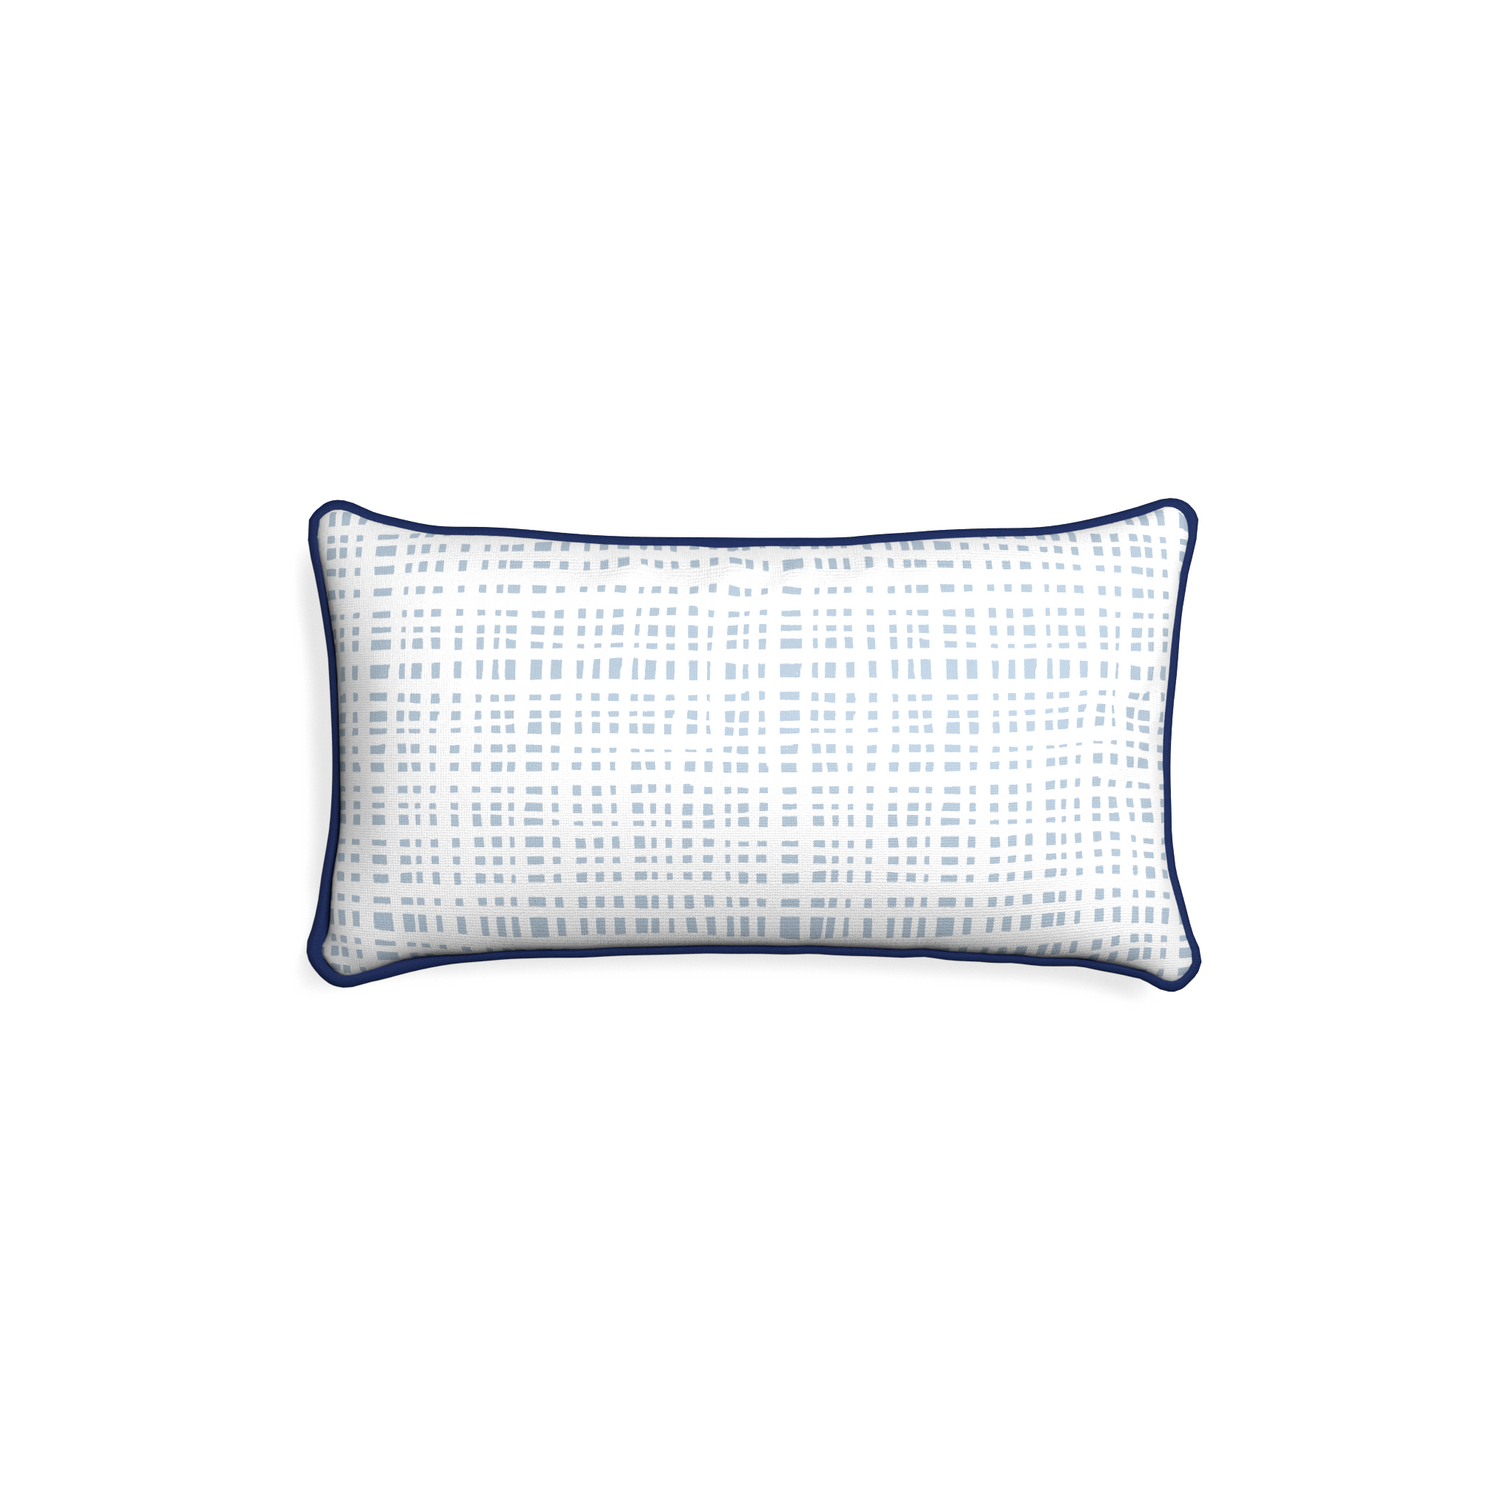 Petite-lumbar ginger sky custom plaid sky bluepillow with midnight piping on white background